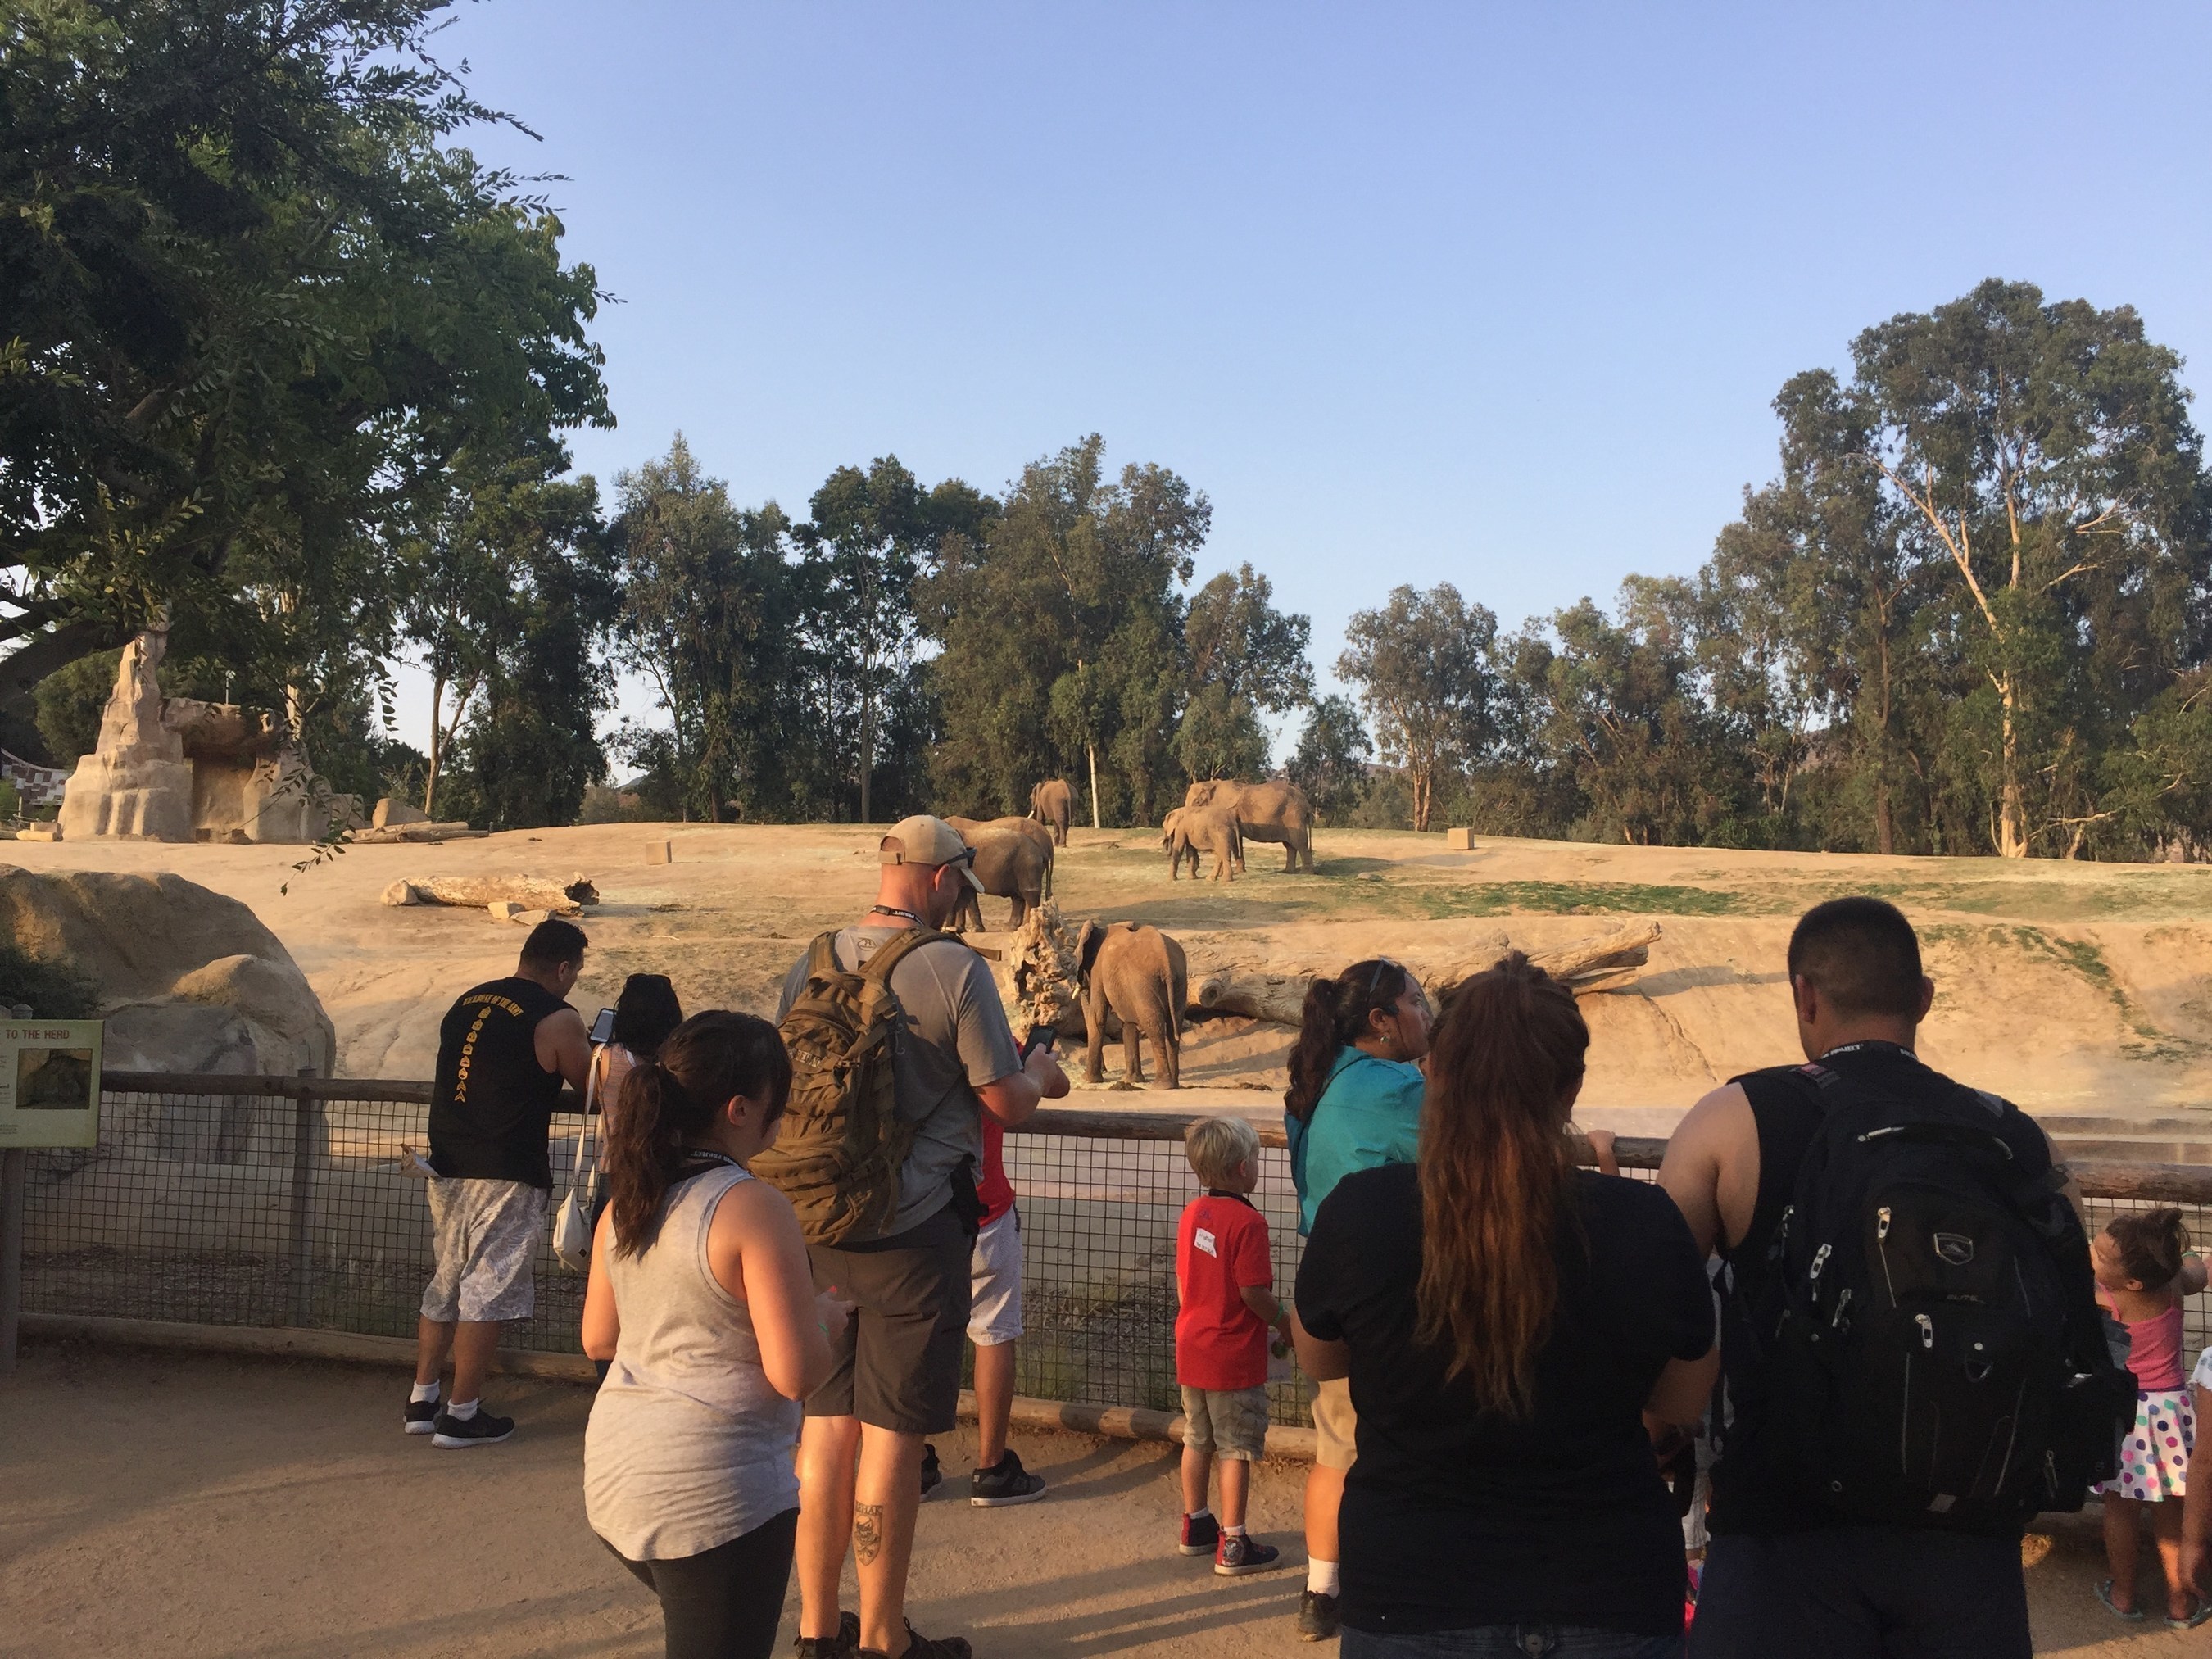 Injured veterans and their families checked out the elephant exhibit during a recent Wounded Warrior Project outing at the San Diego Zoo Safari Park.